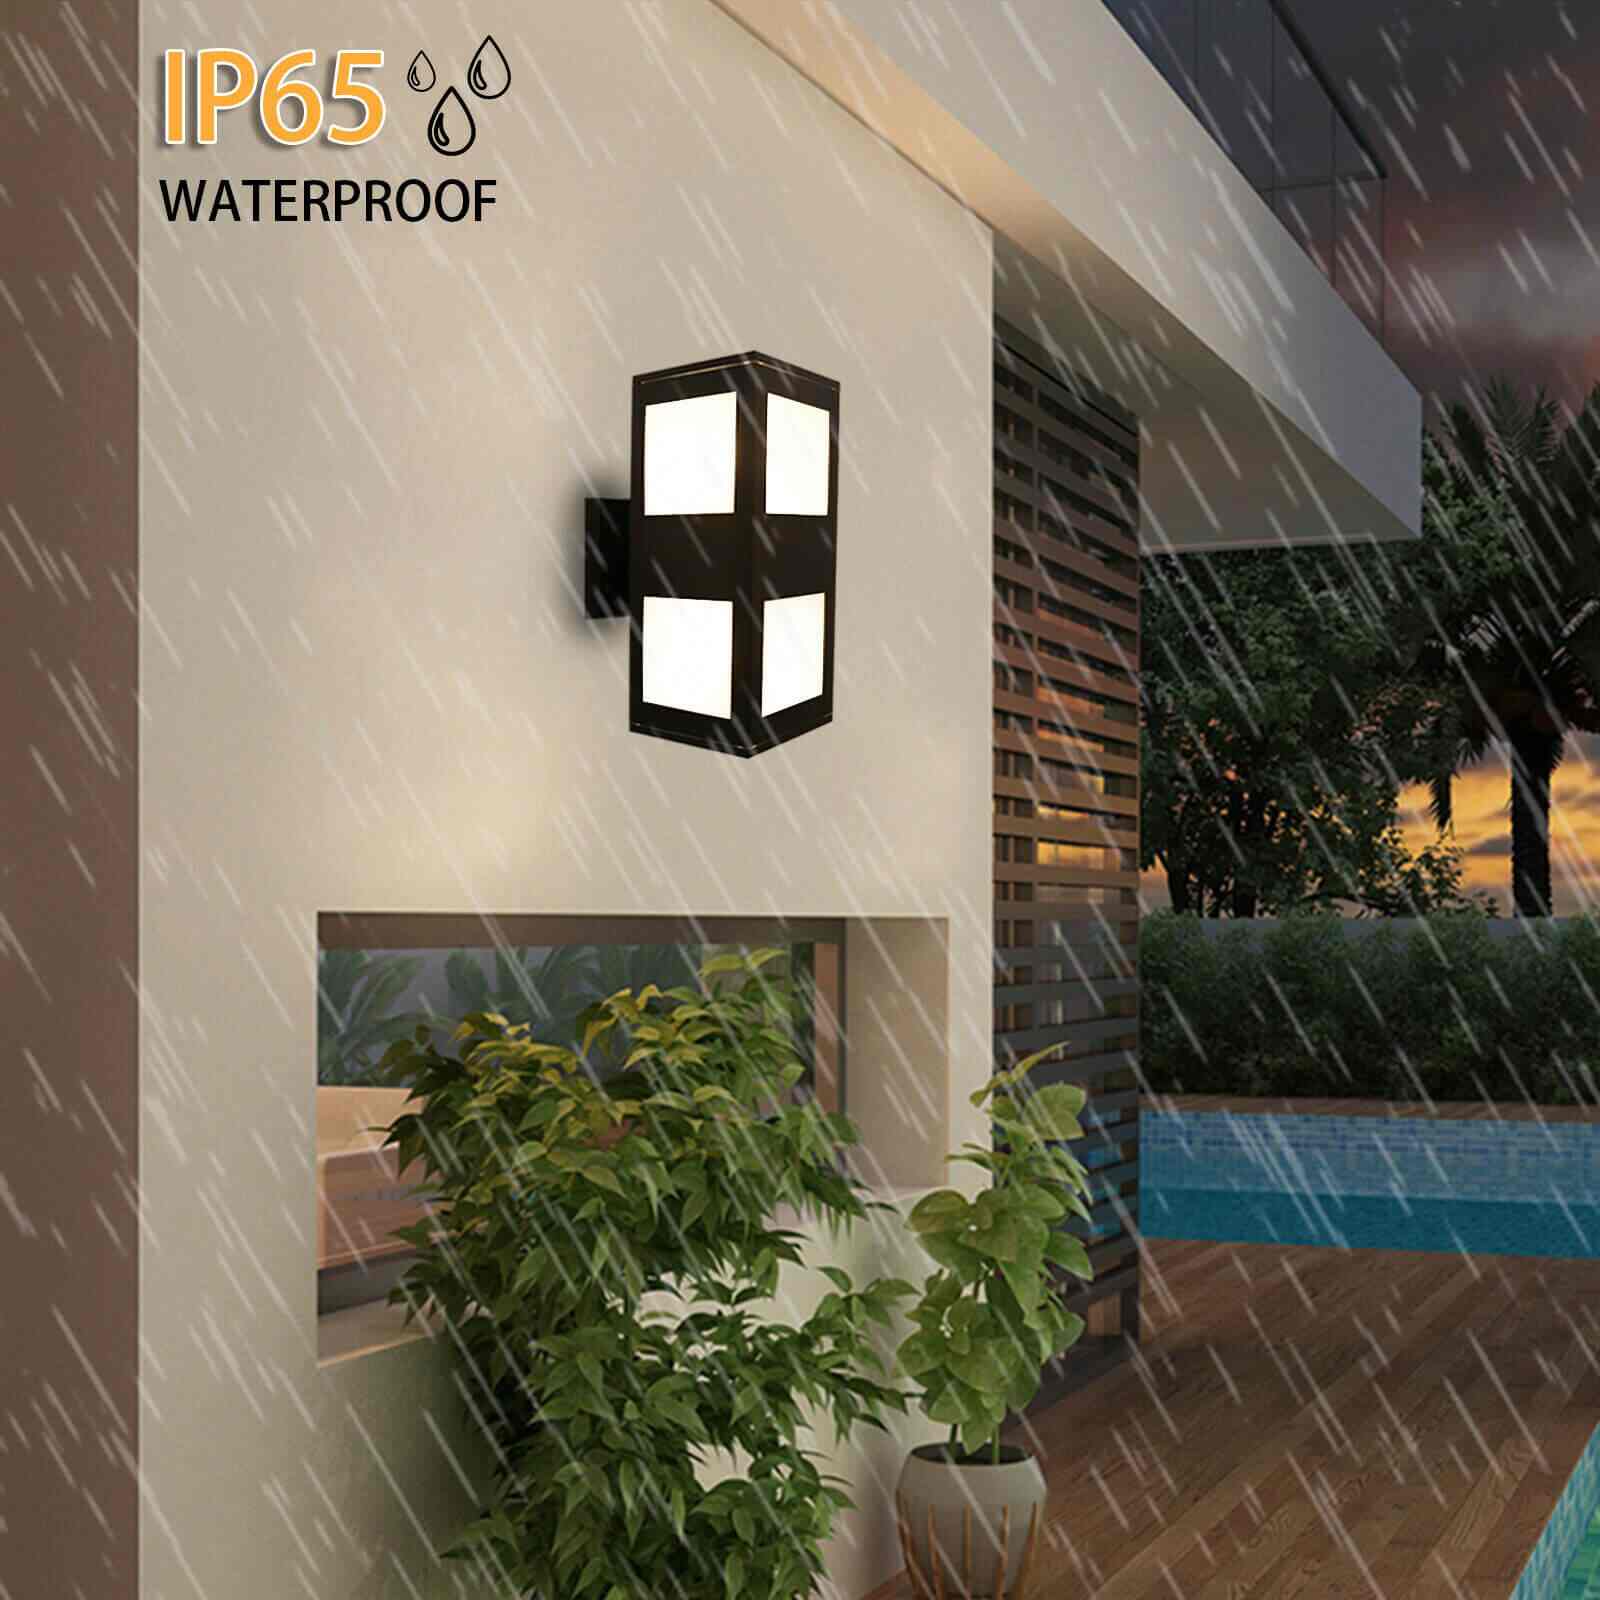 Feature of Modern Waterproof LED Wall Sconce Light